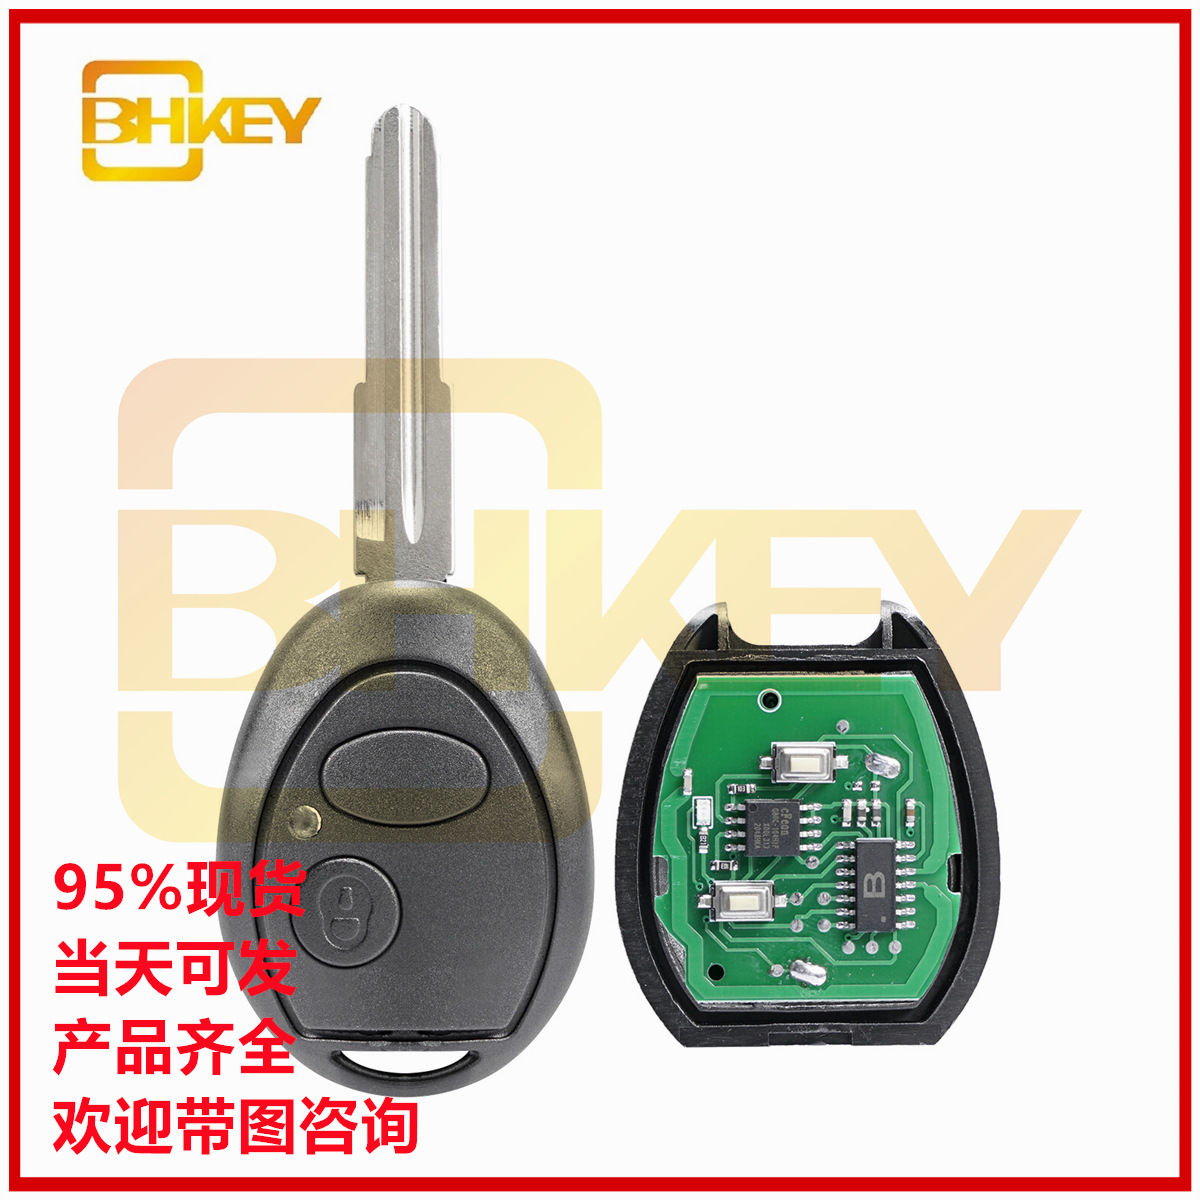 Fit for Land Rover Discoverer 2-key car key N5FVALTX 3 315-ID73/433-PCF7930AS